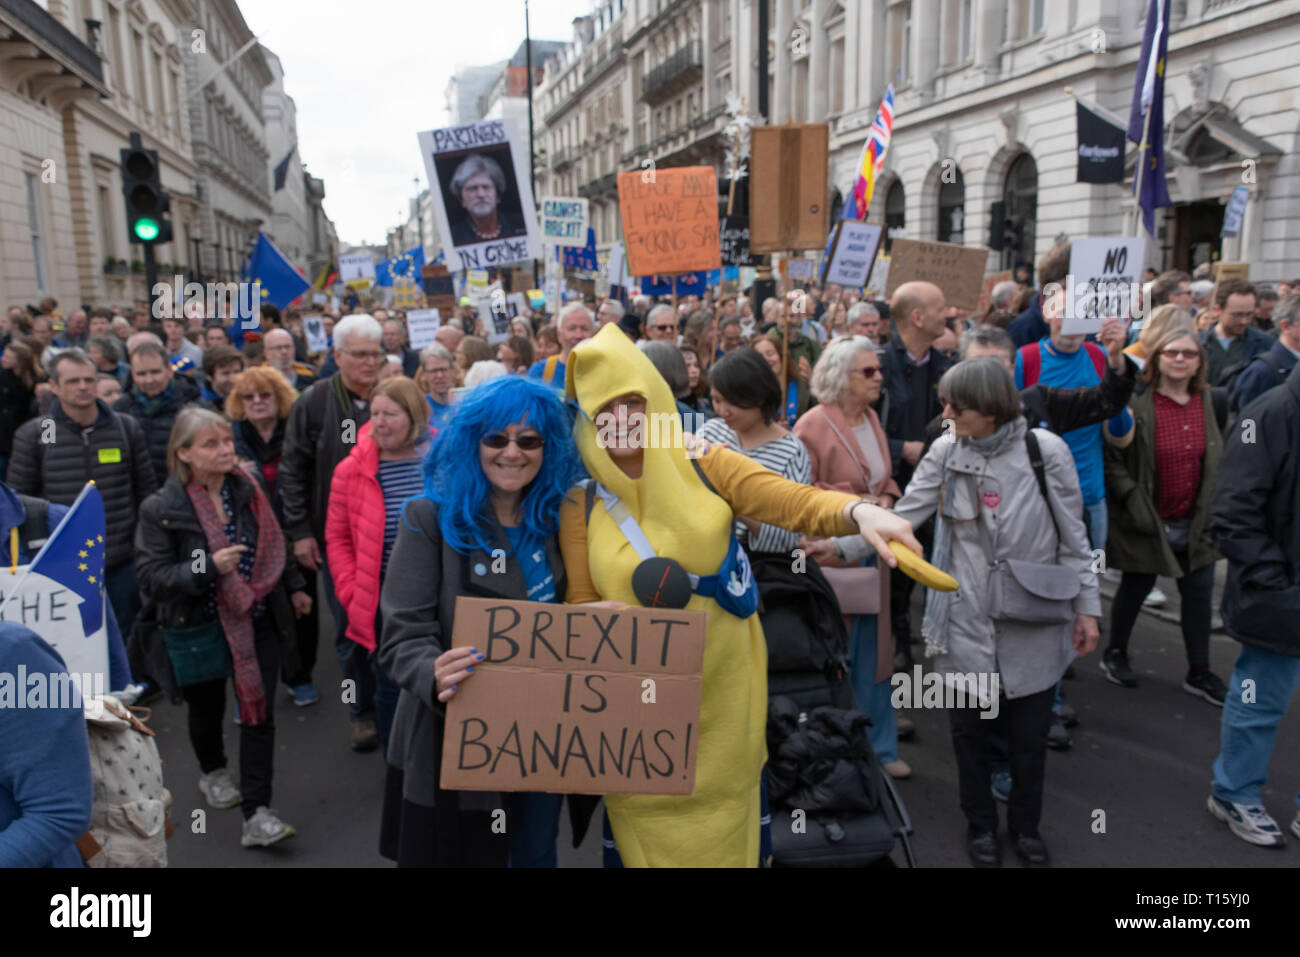 London, UK. 23rd Mar, 2019. Peoples Vote March, Crowd detail and banners as taken from the perspective of a protester. Remain banners, second referendum. Credit: Tony Pincham/Alamy Live News Stock Photo